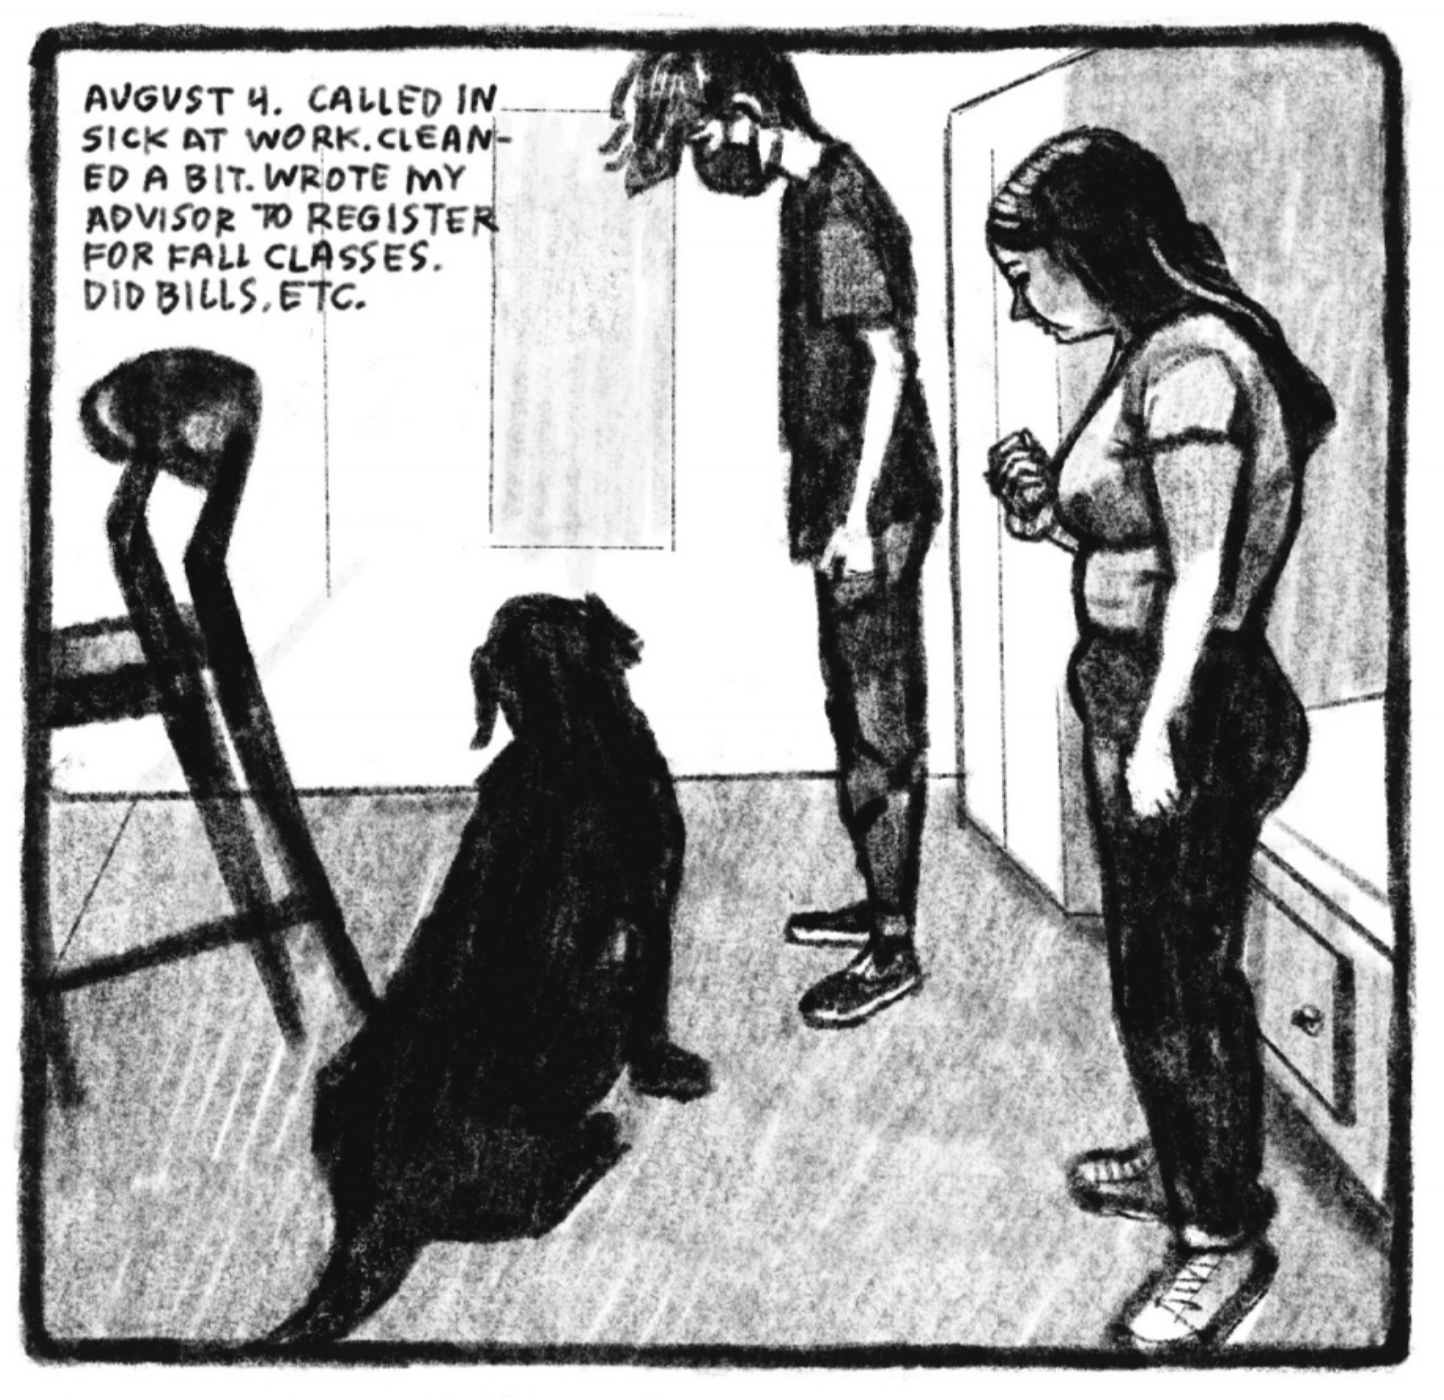 2. Enzo stands to the right of a young woman with medium-length dark hair. Both of them are looking down at one of Kimâ€™s family dog, who is sitting politely. Enzo is wearing a face mask for covid. â€œAugust 4. Called in sick at work. Cleaned a bit. Wrote my advisor to register for fall classes. Did bills, etc.â€